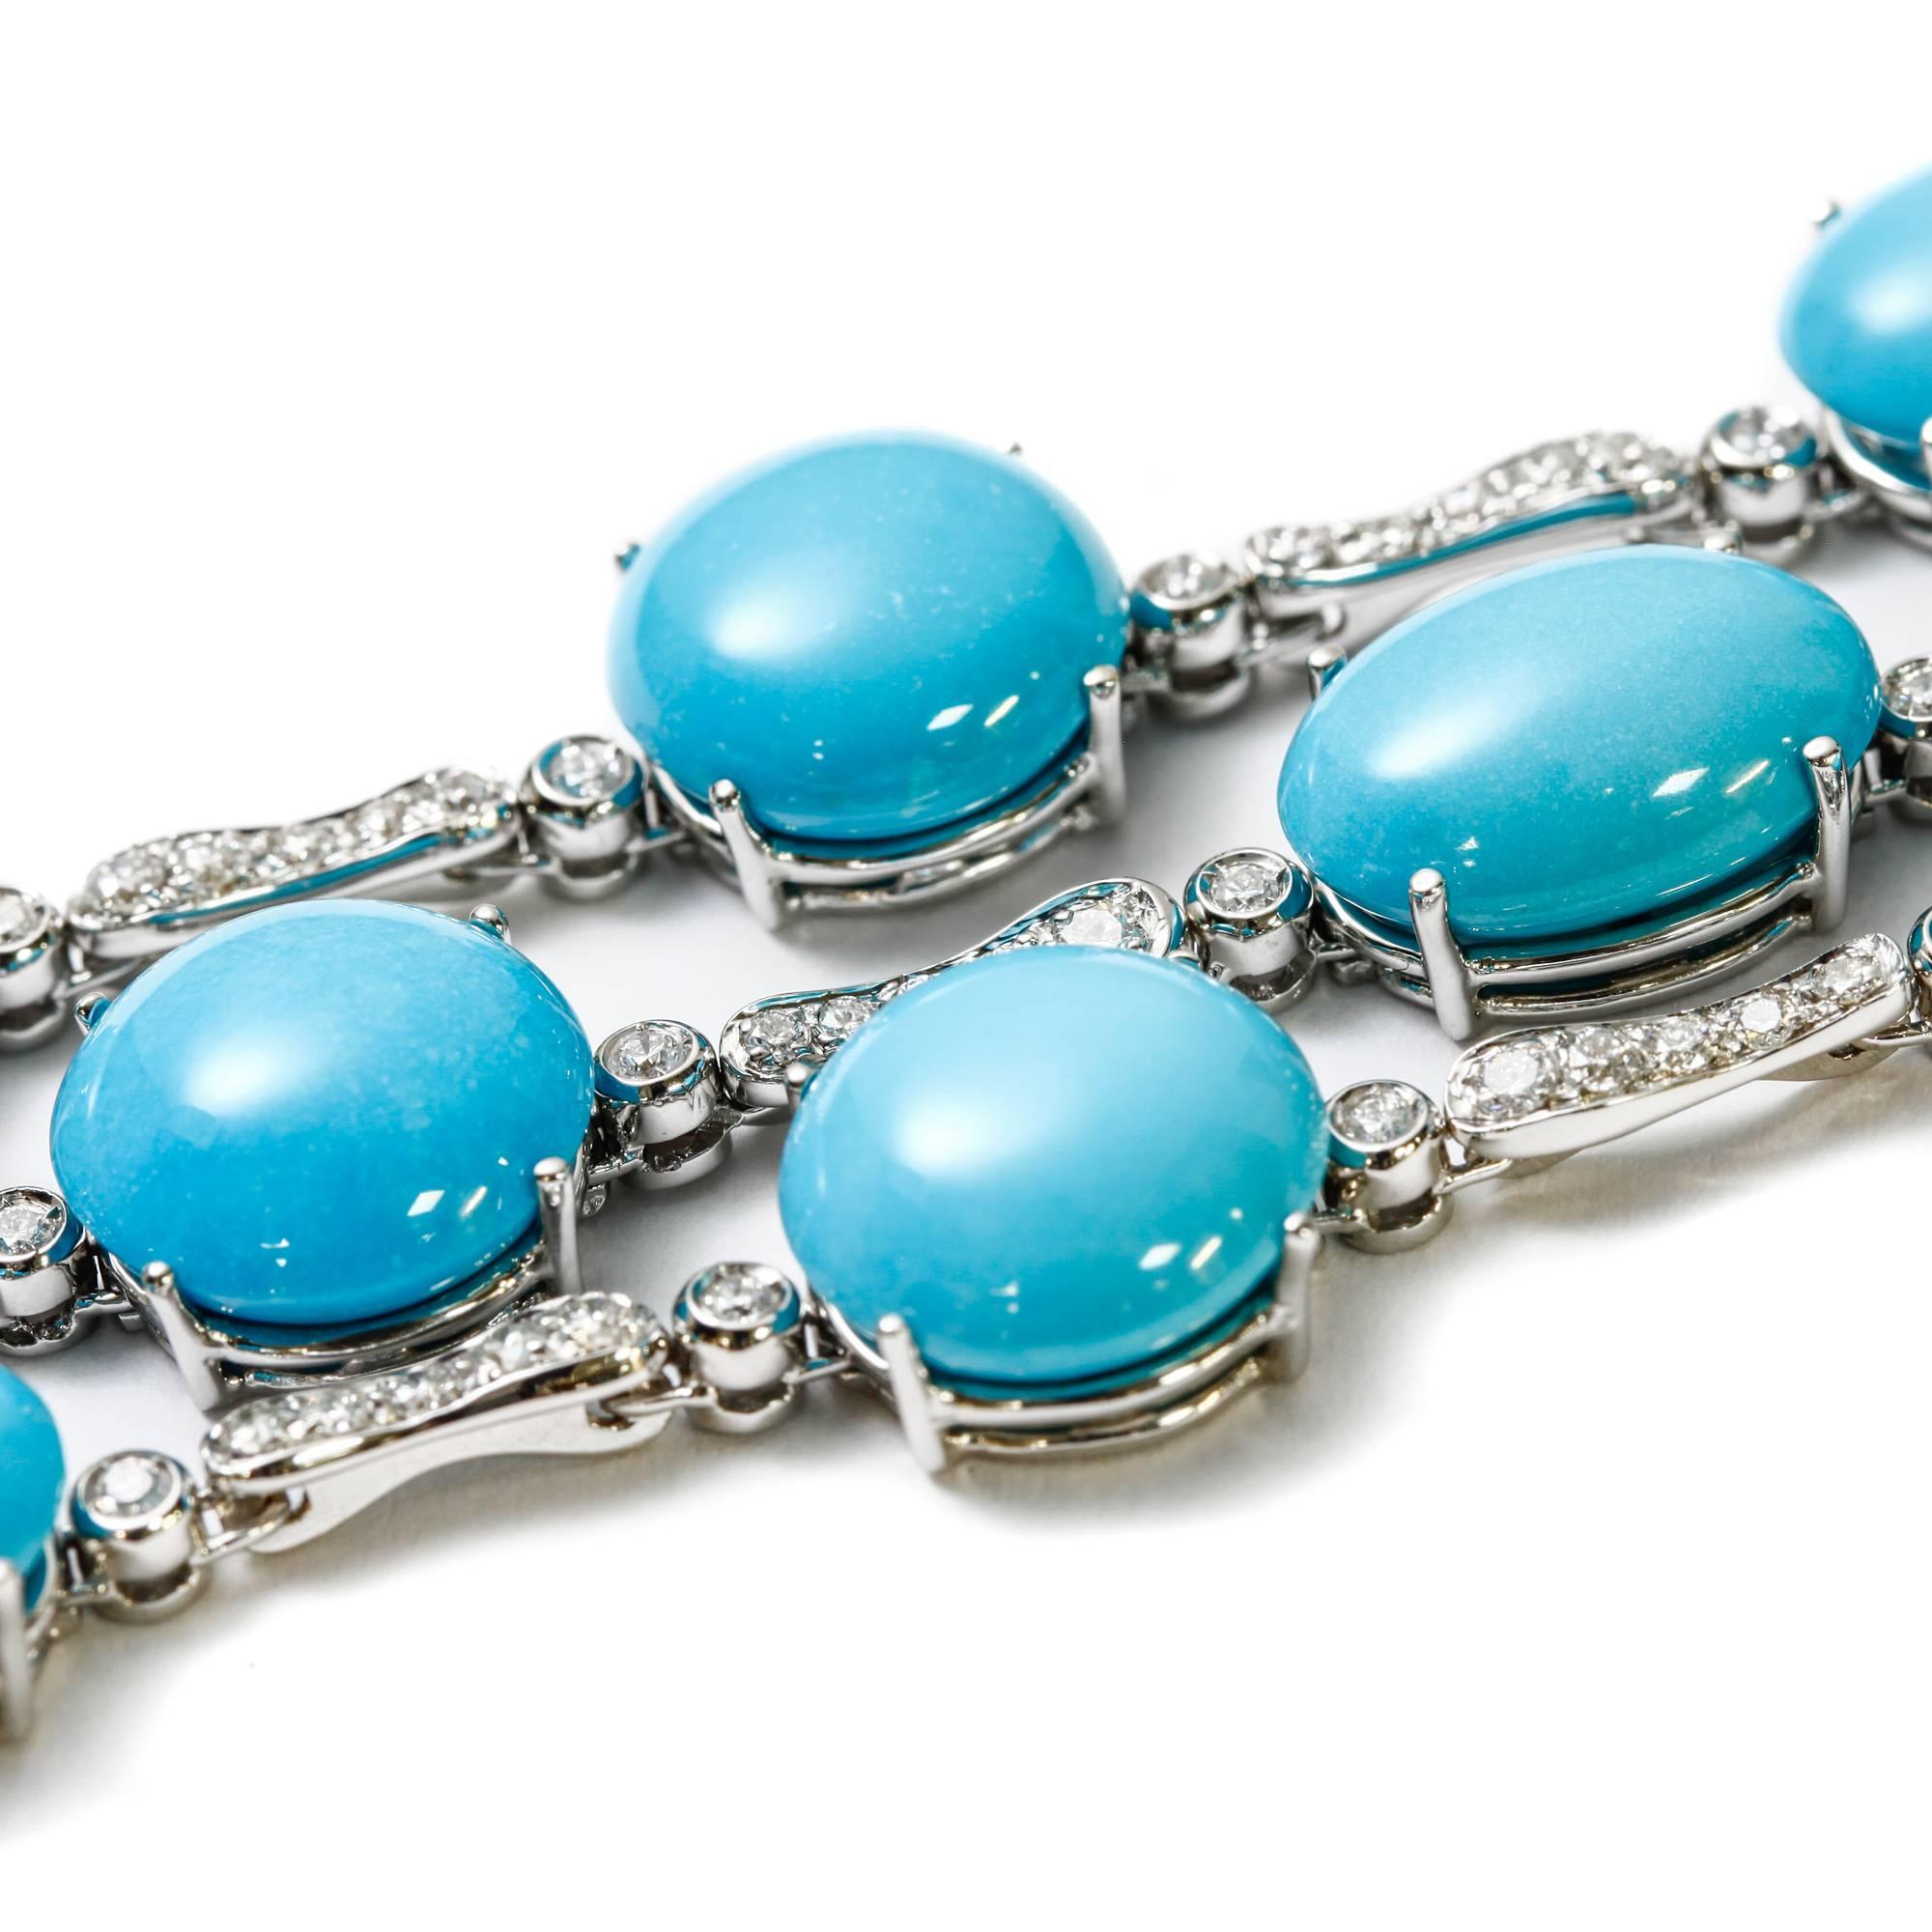 This A & Furst 3 row bracelet features 82.50 ct. round and oval turquoise cabochon cut stones as well as 2.19 ct. pave-set round diamonds in 18k white gold. It is in perfect condition and looks new. The length is adjustable (see photos) and it will